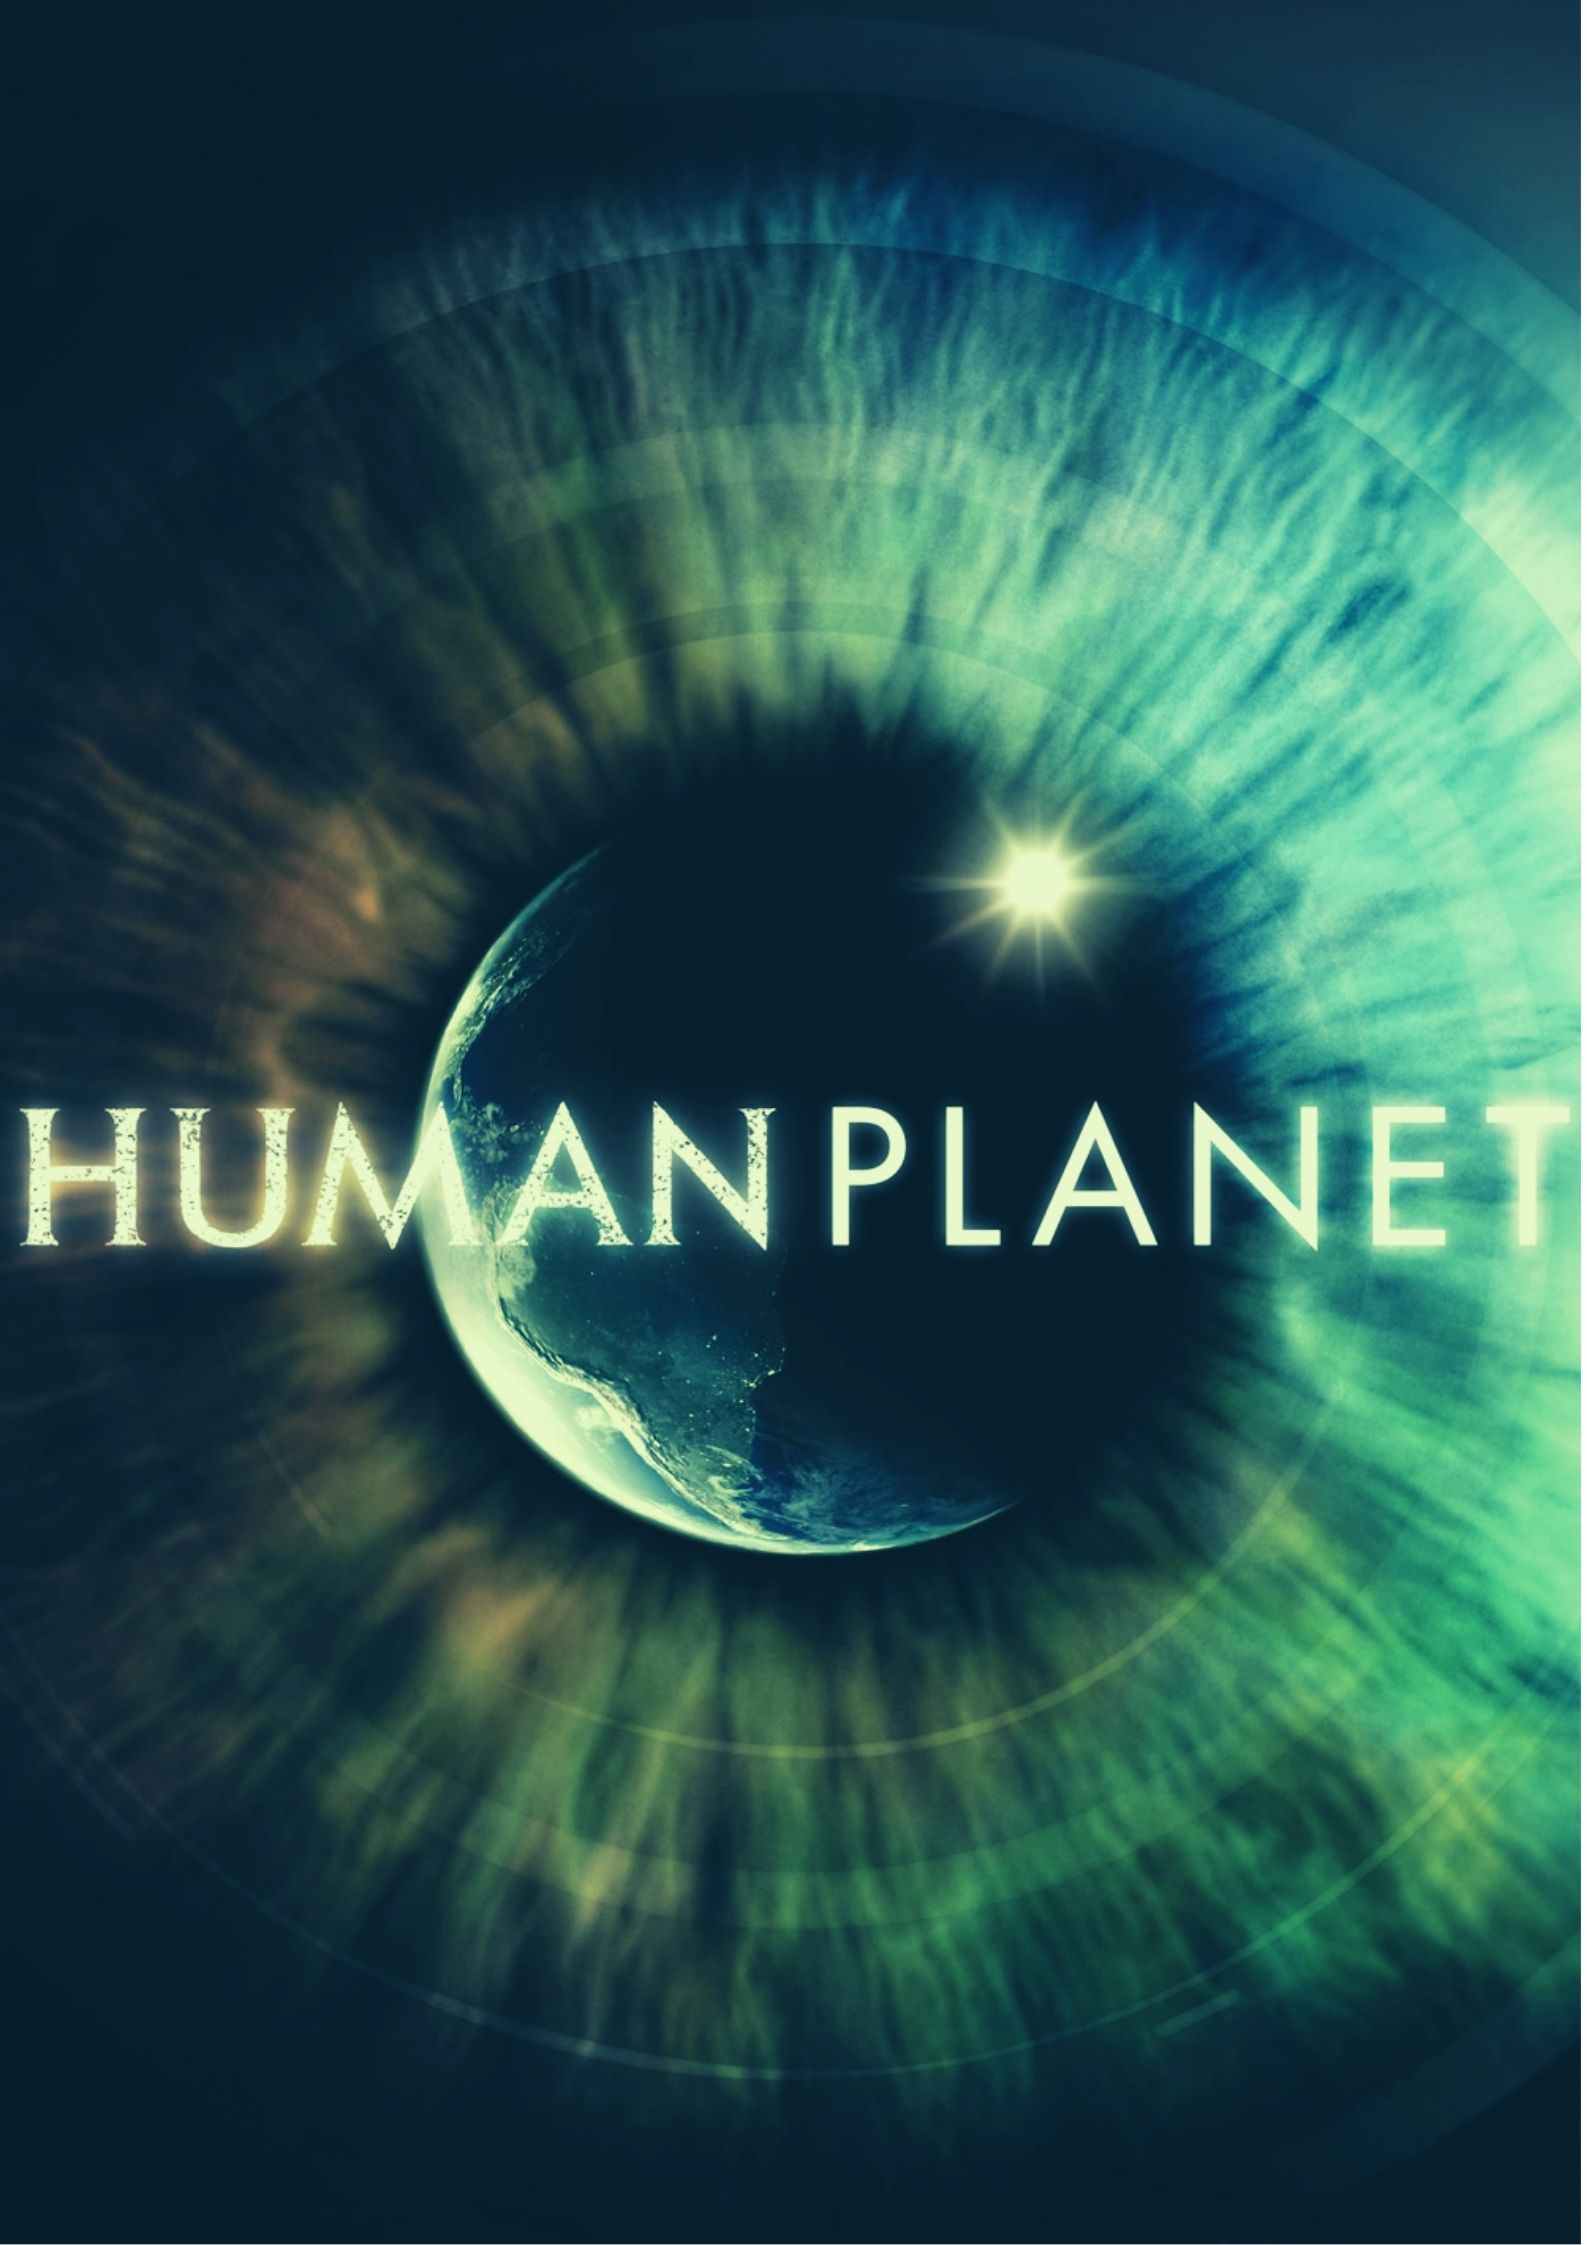 Human Planet Parents Guide | Human Planet Age Rating 2011